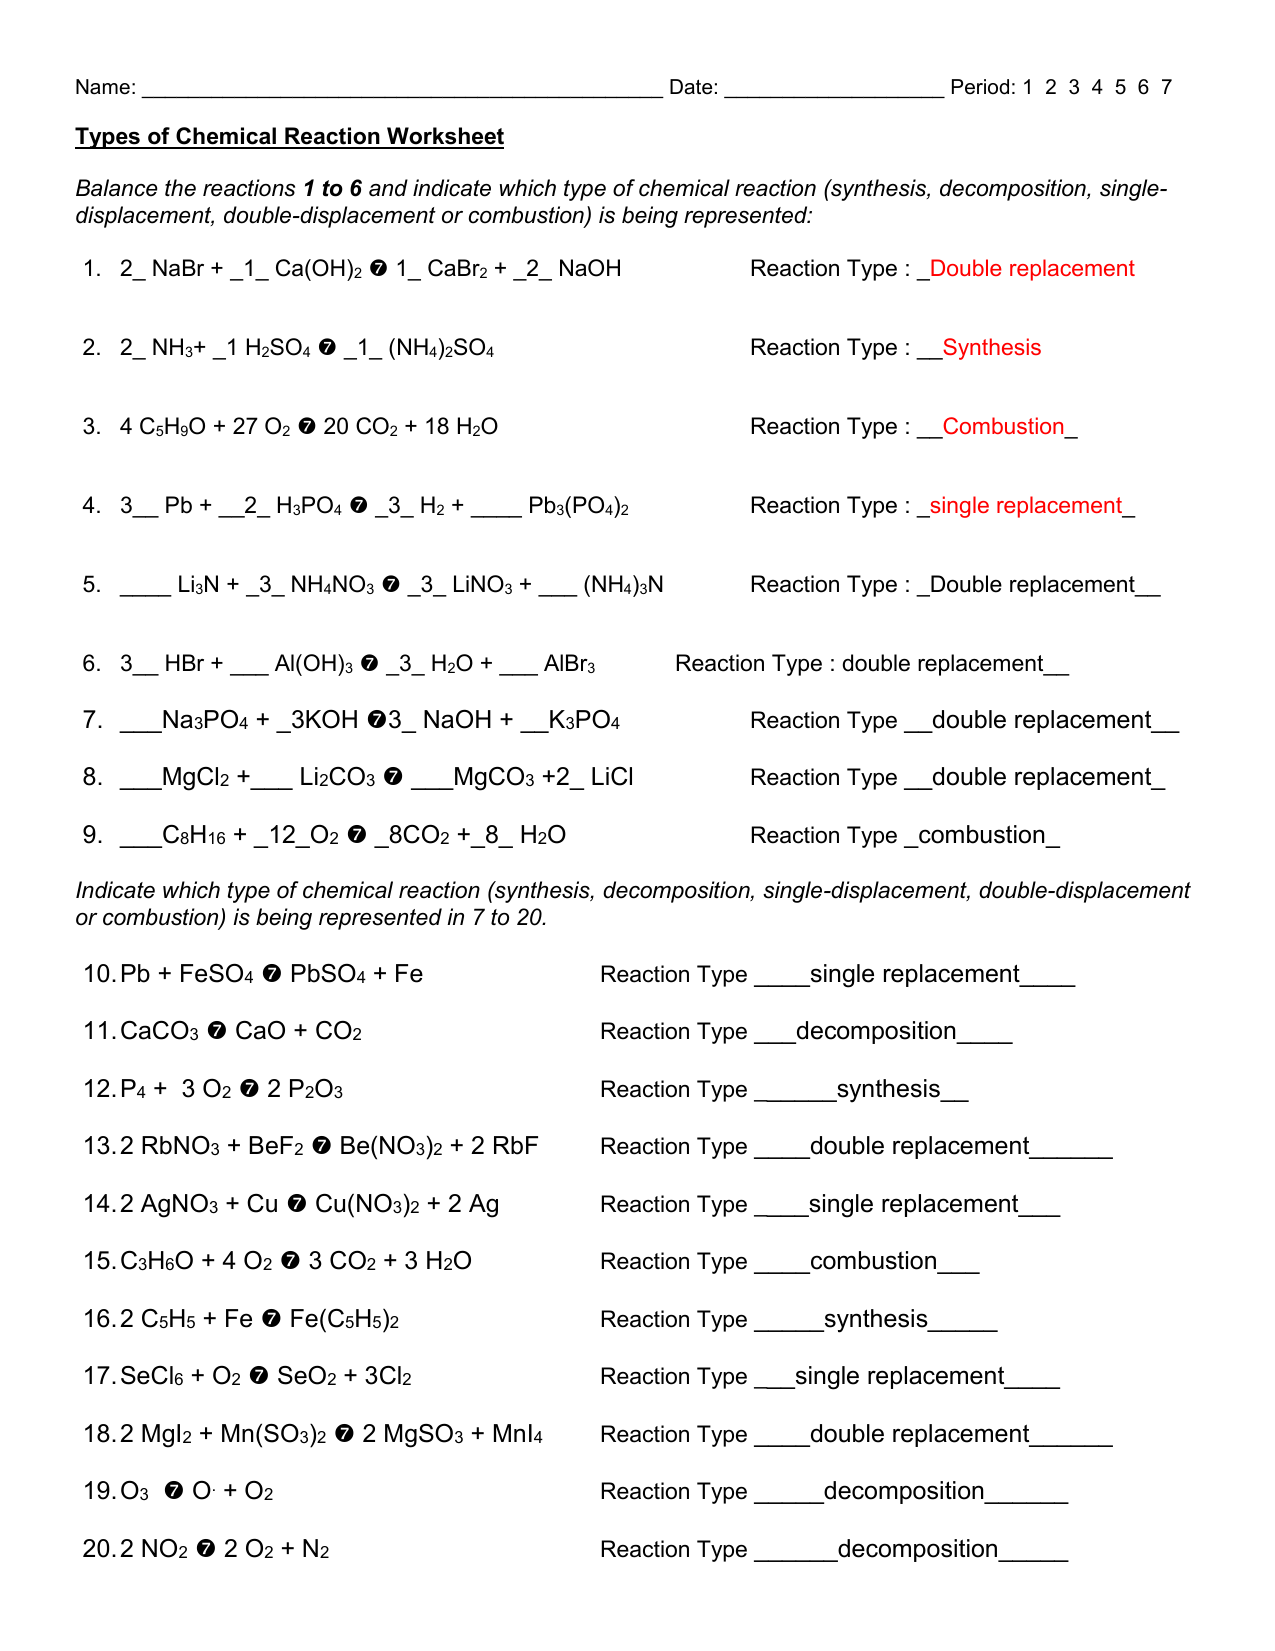 Types of Chemical Reaction Worksheetanswers Regarding Chemical Reaction Type Worksheet